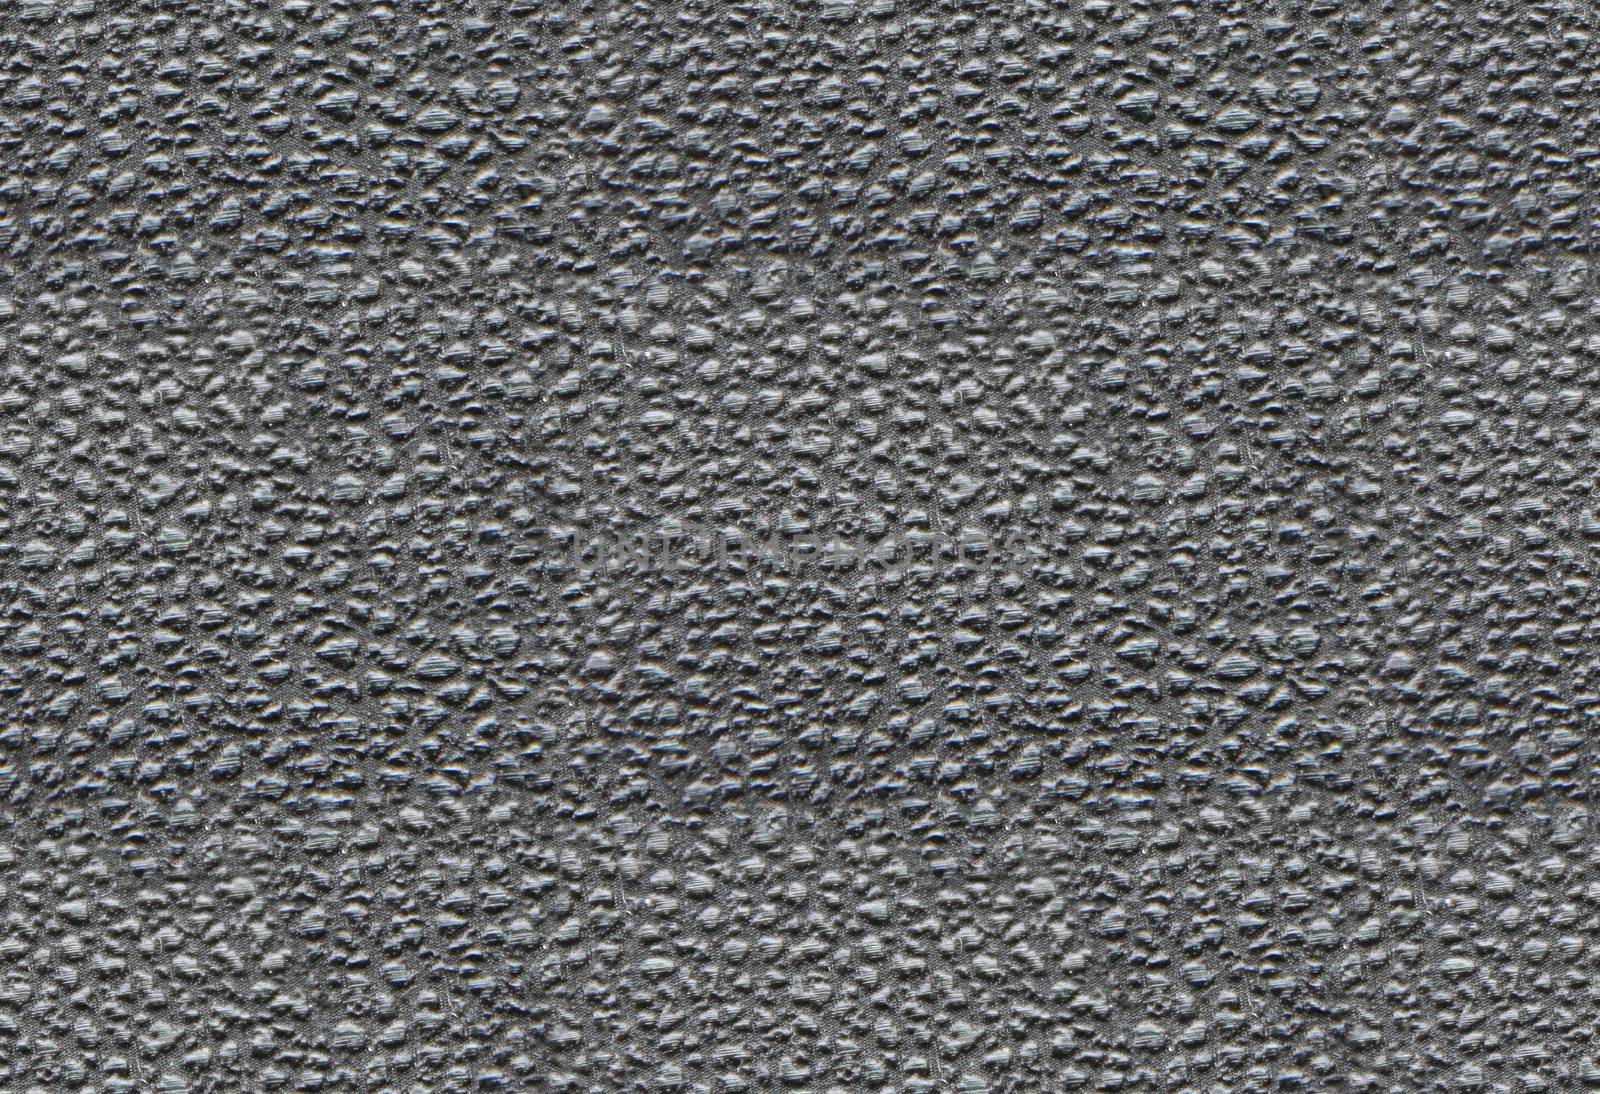 Artificial leather tiled texture background close up